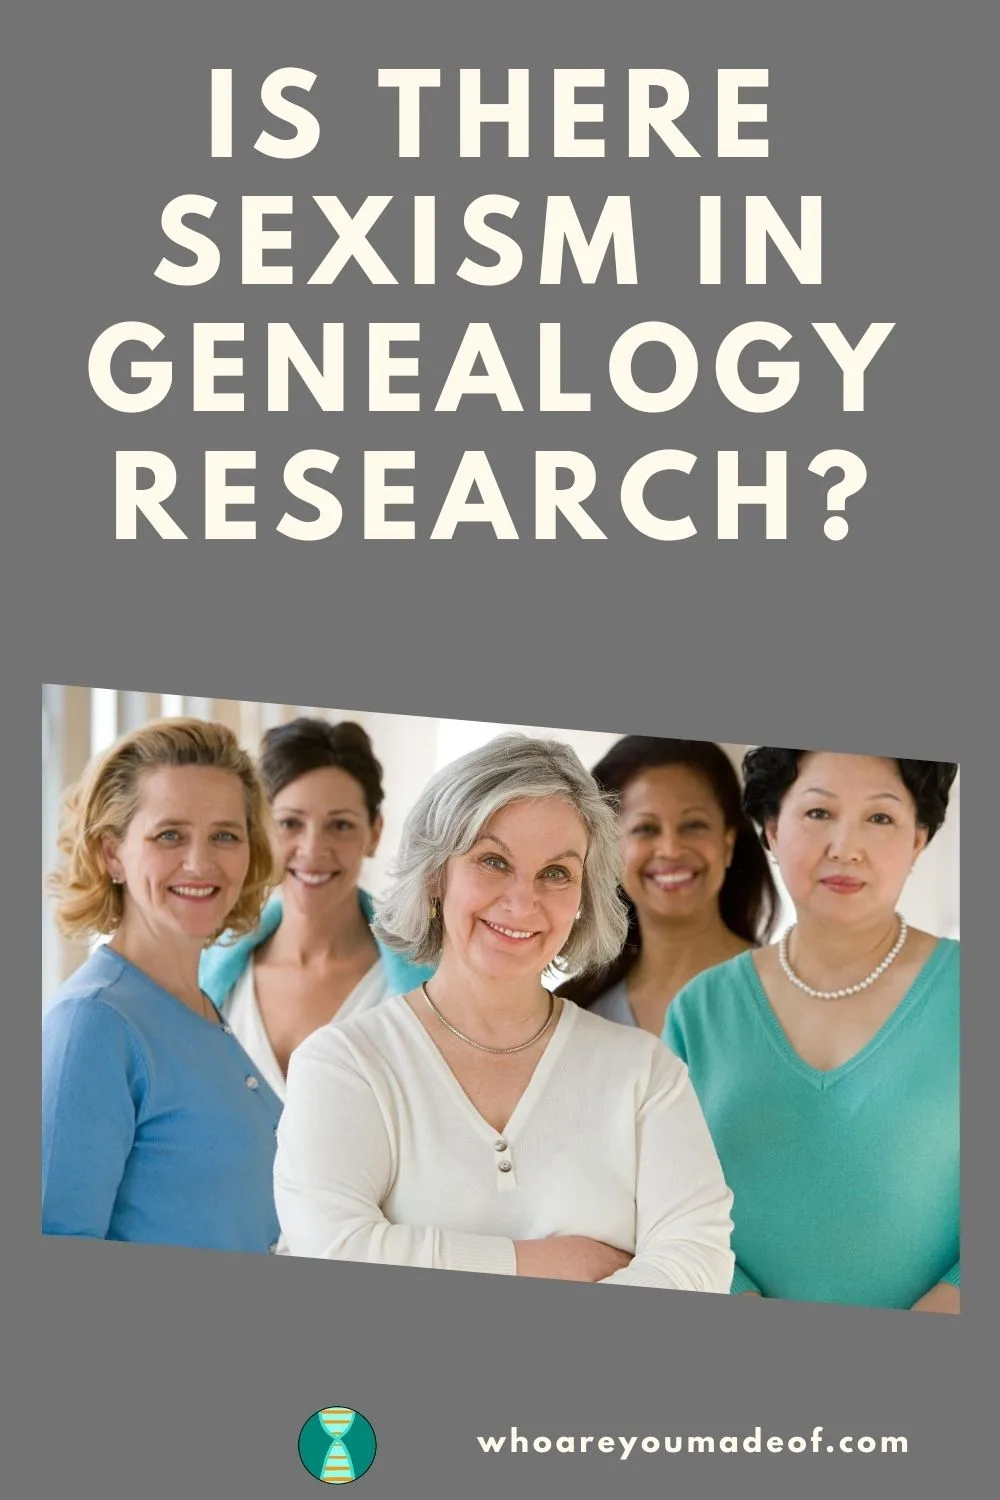 Is There Sexism in Genealogy Research Pinterest image with several women 